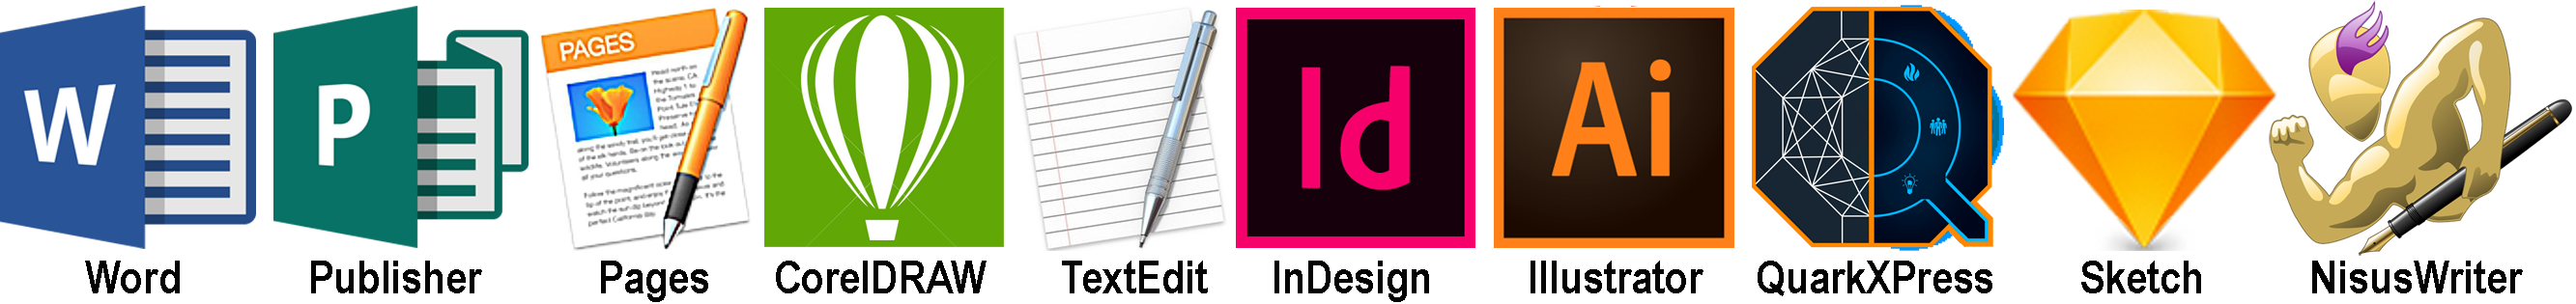 Recommended Applications - Word, Publisher, Pages, CoreDRAW, TextEdit, InDesign, Illustrator, QuarkXPress, Sketch, NisusWriter.